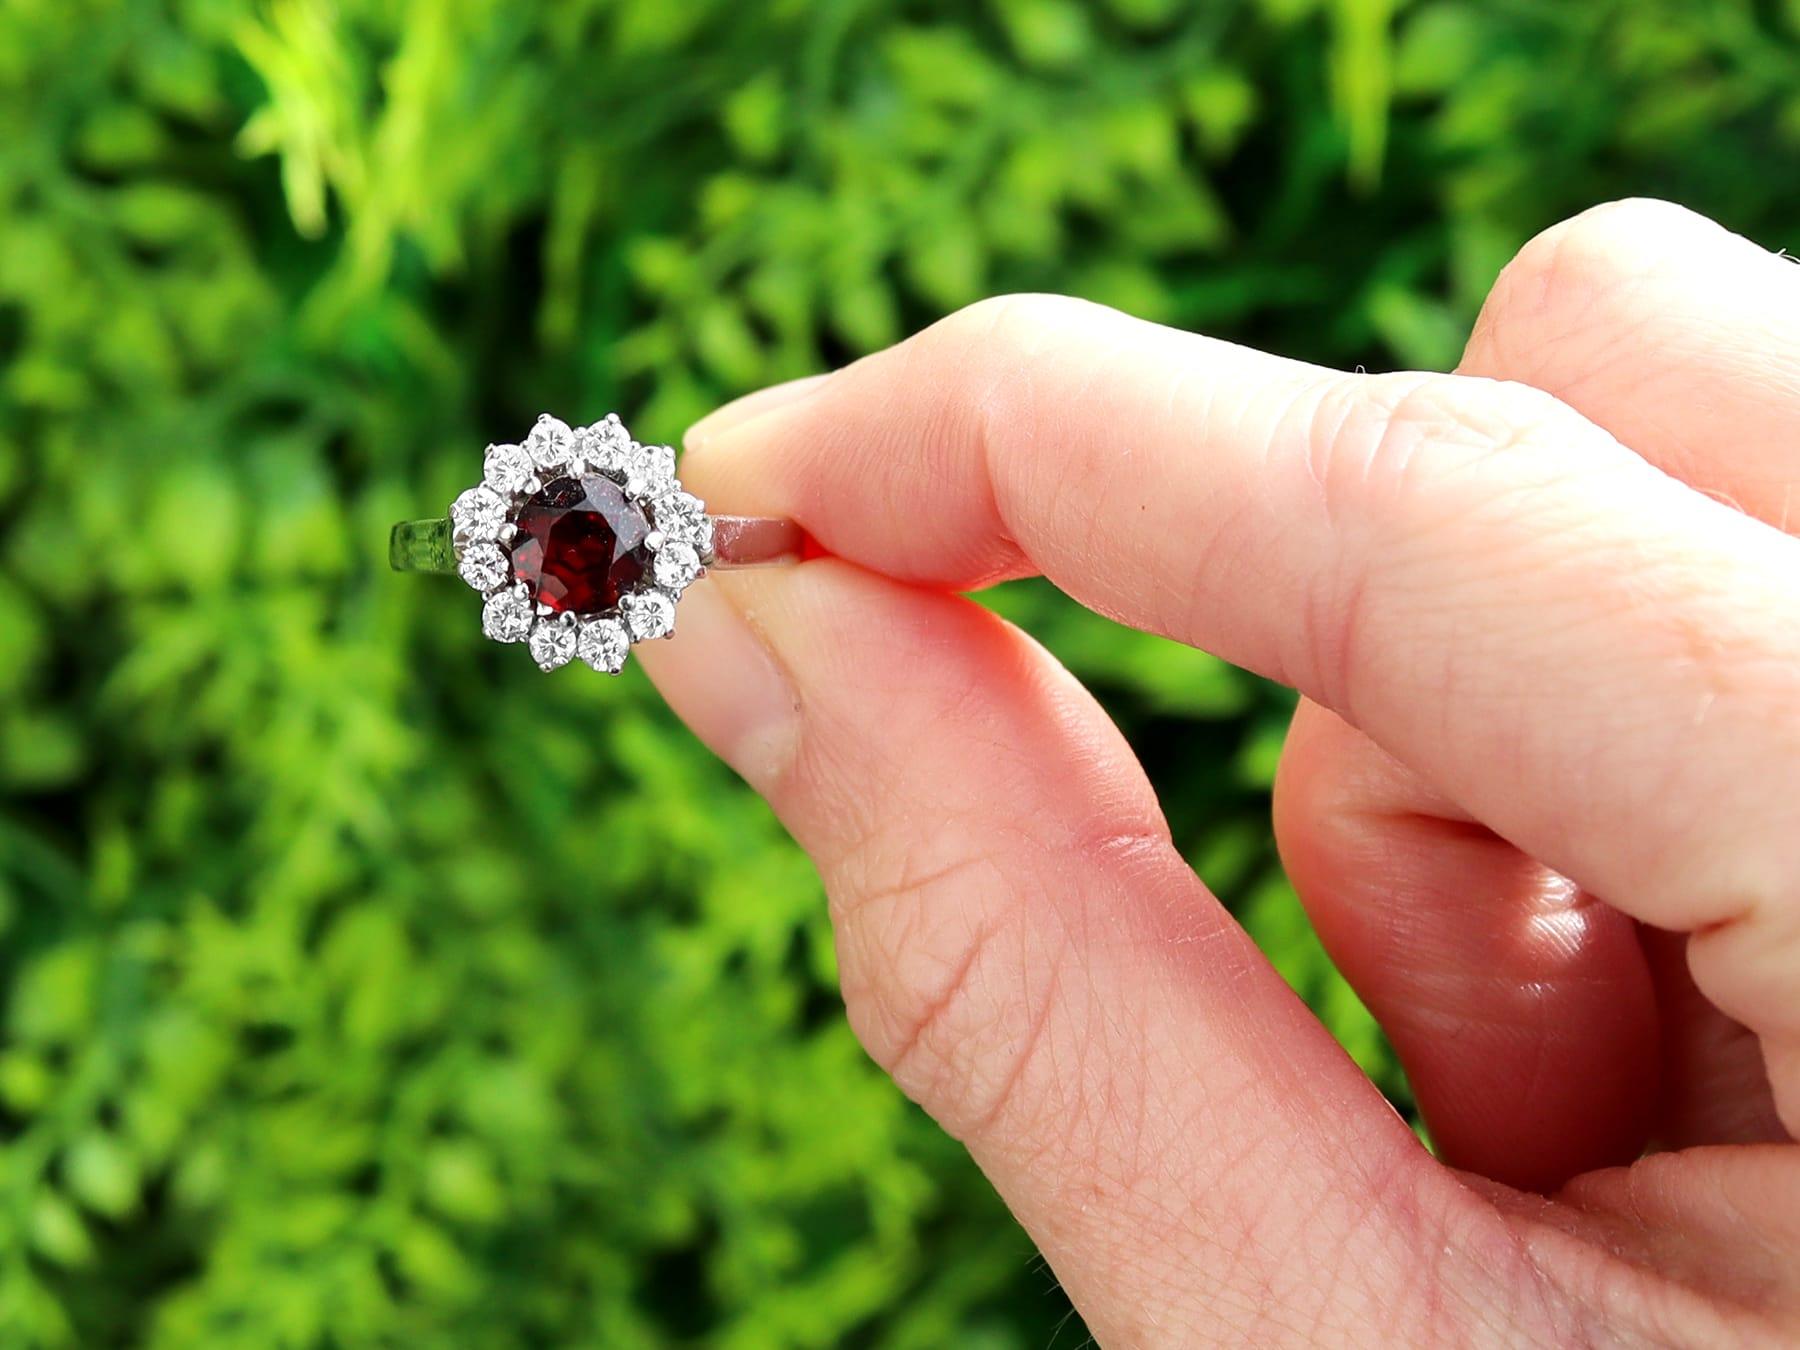 A fine and impressive vintage 1.05 carat garnet and 0.36 carat diamond, 18 karat white gold cluster ring; part of our vintage jewelry and estate jewelry collections.

This fine and impressive garnet cluster ring has been crafted in 18k white